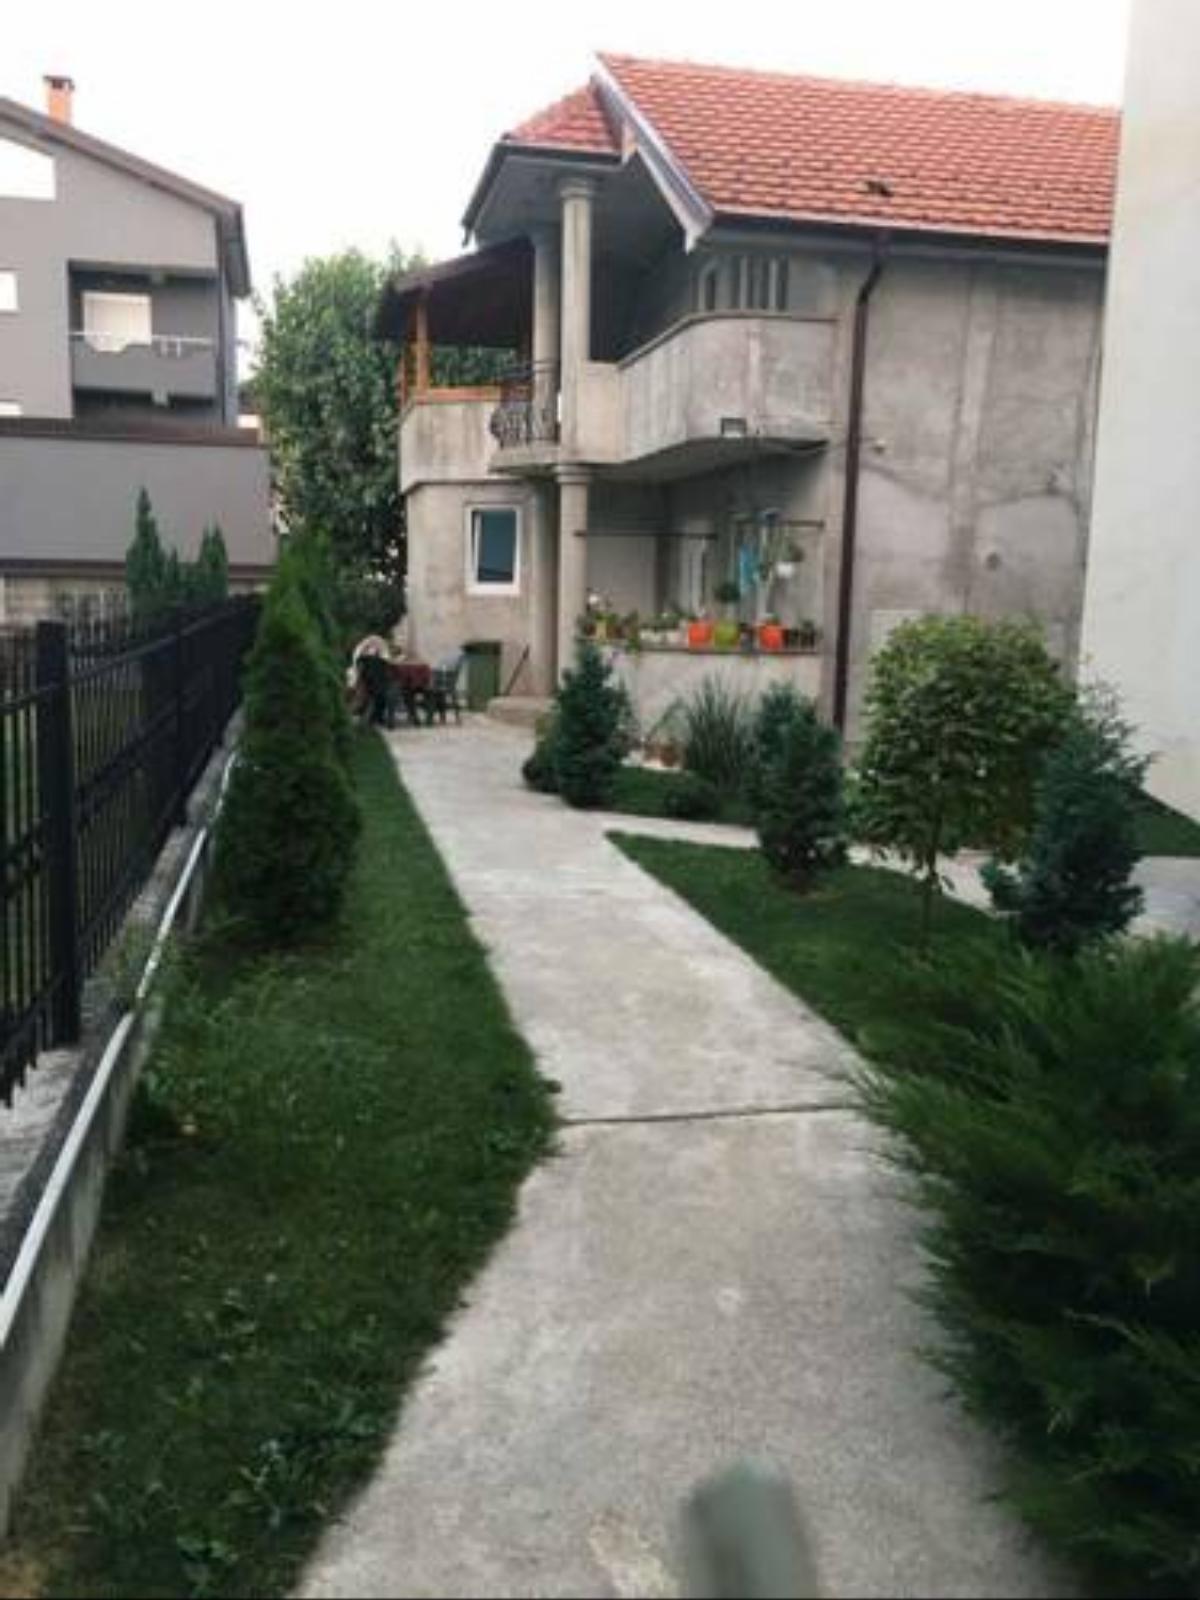 House to rent for UEFA in Macedonia Hotel Gostivar Macedonia